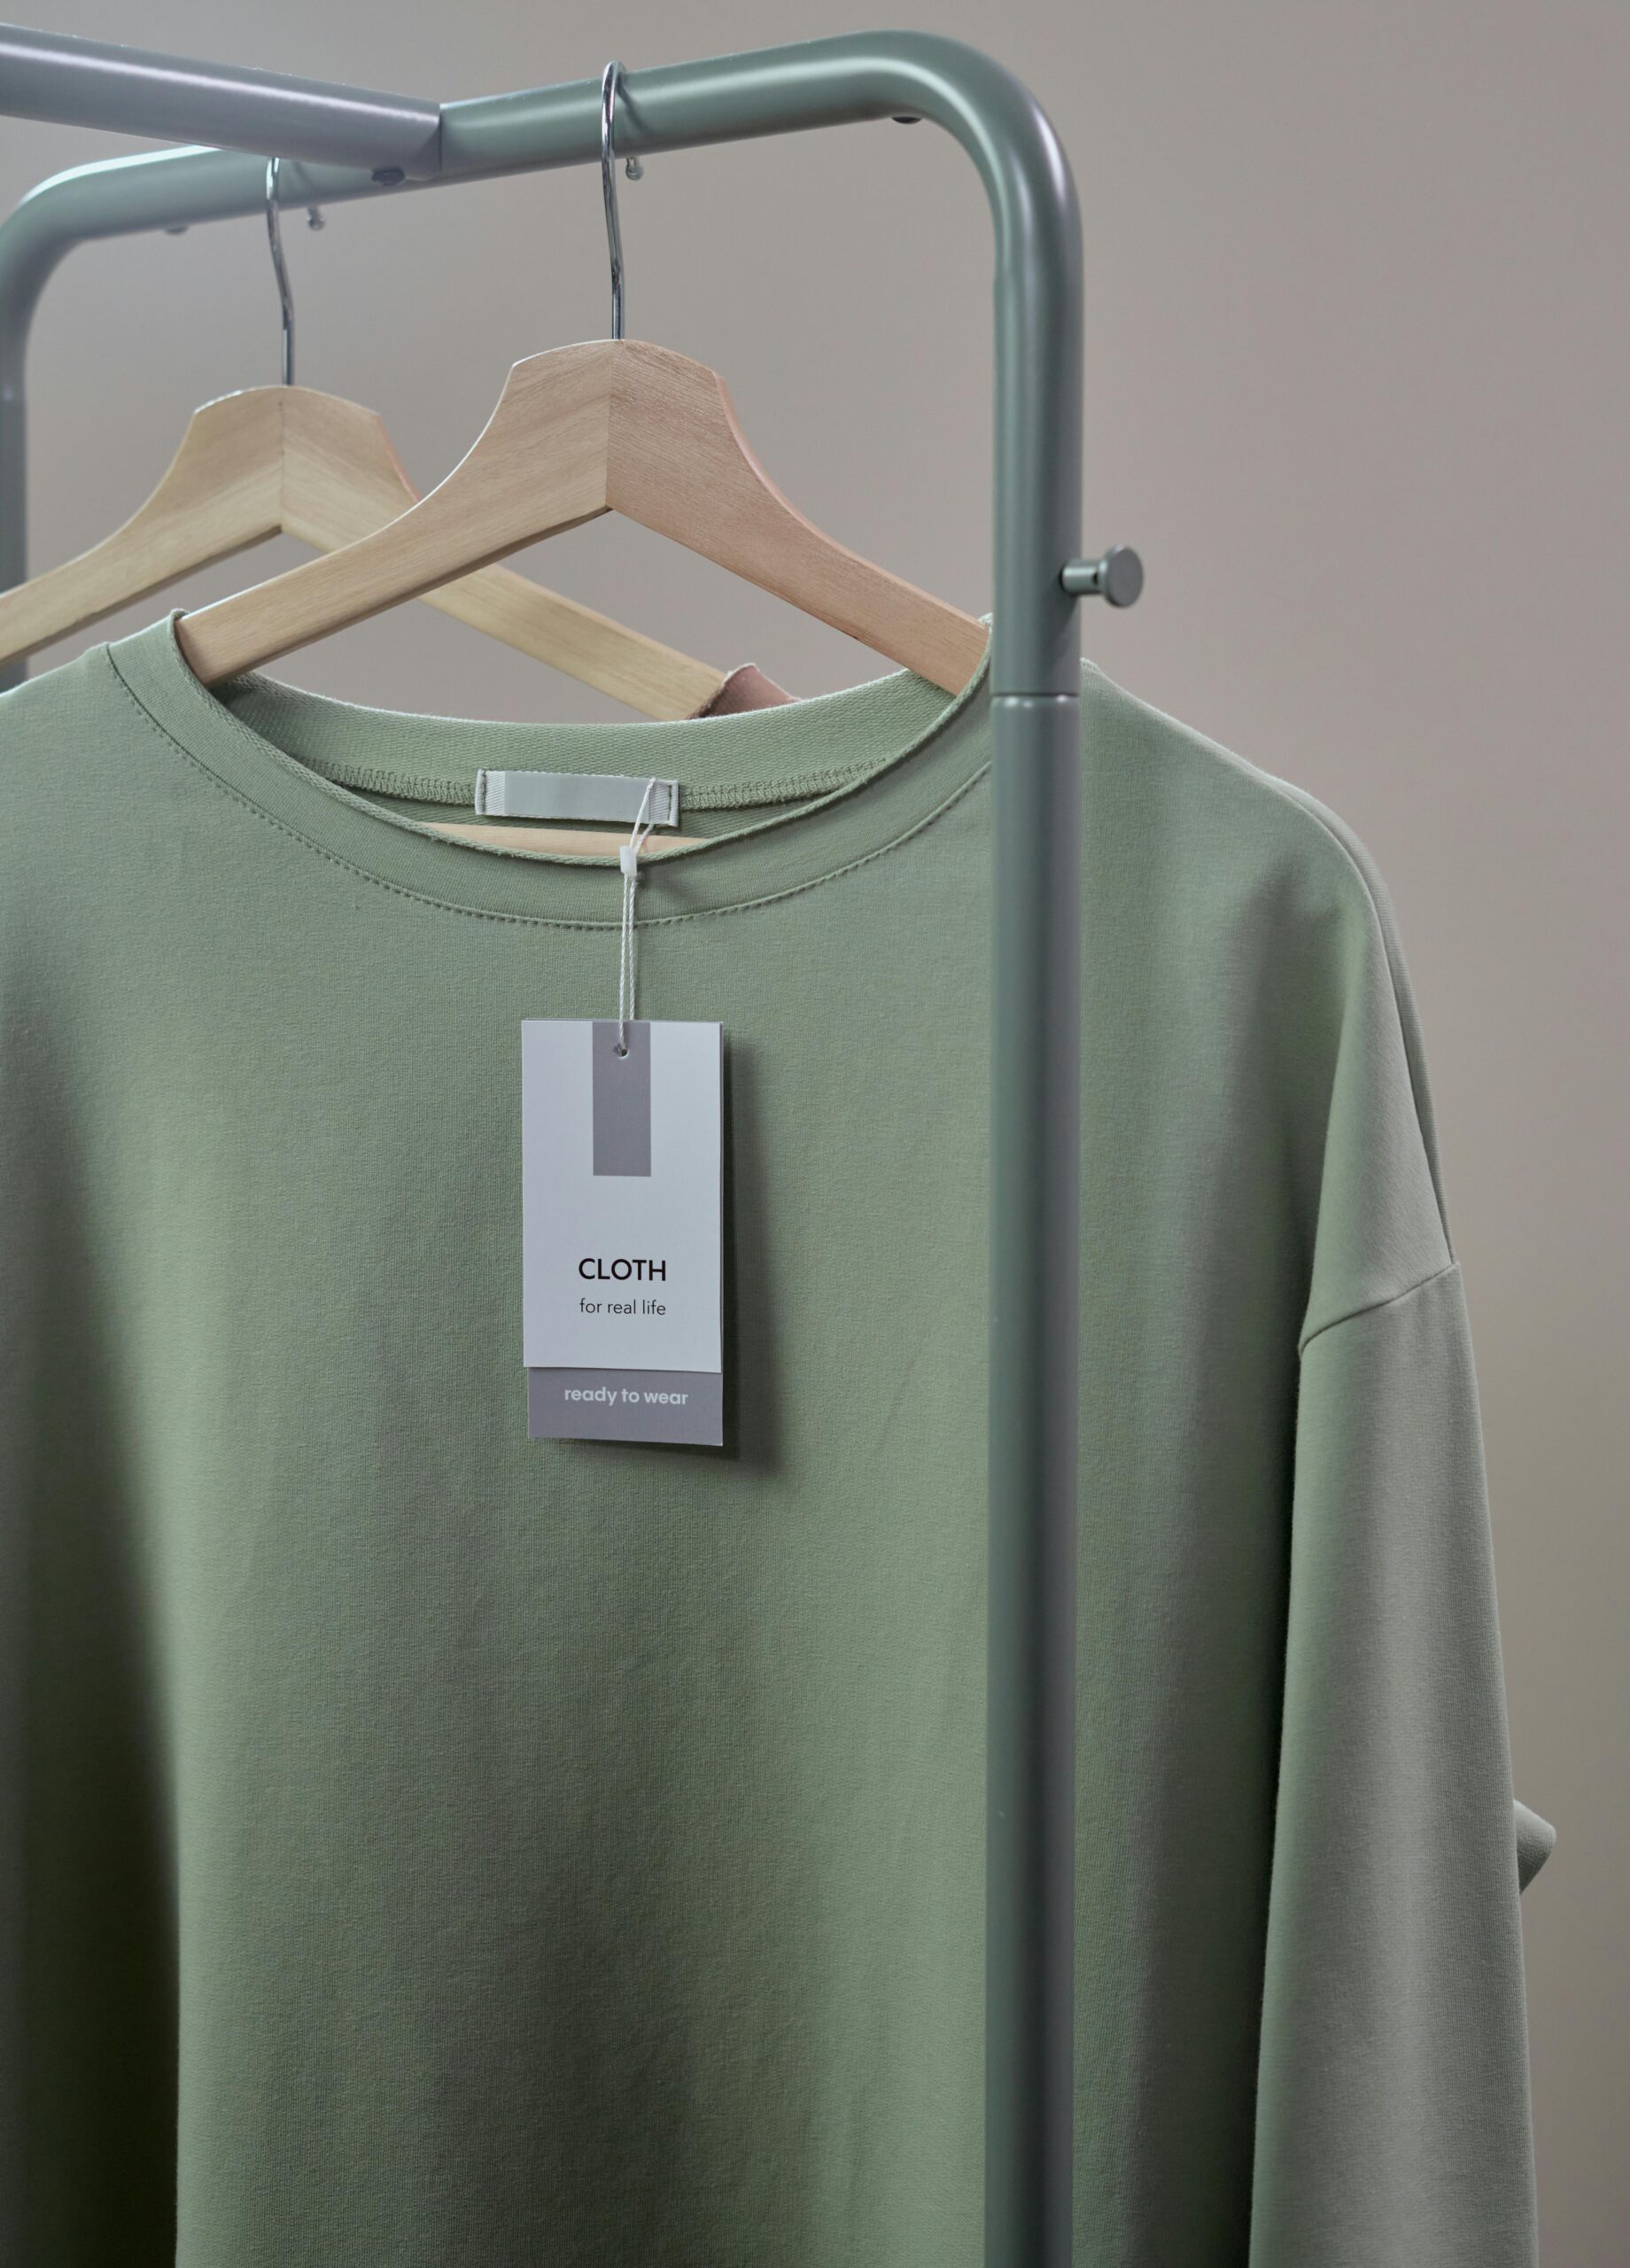 shirt on hanger with eco friendly clothing tag